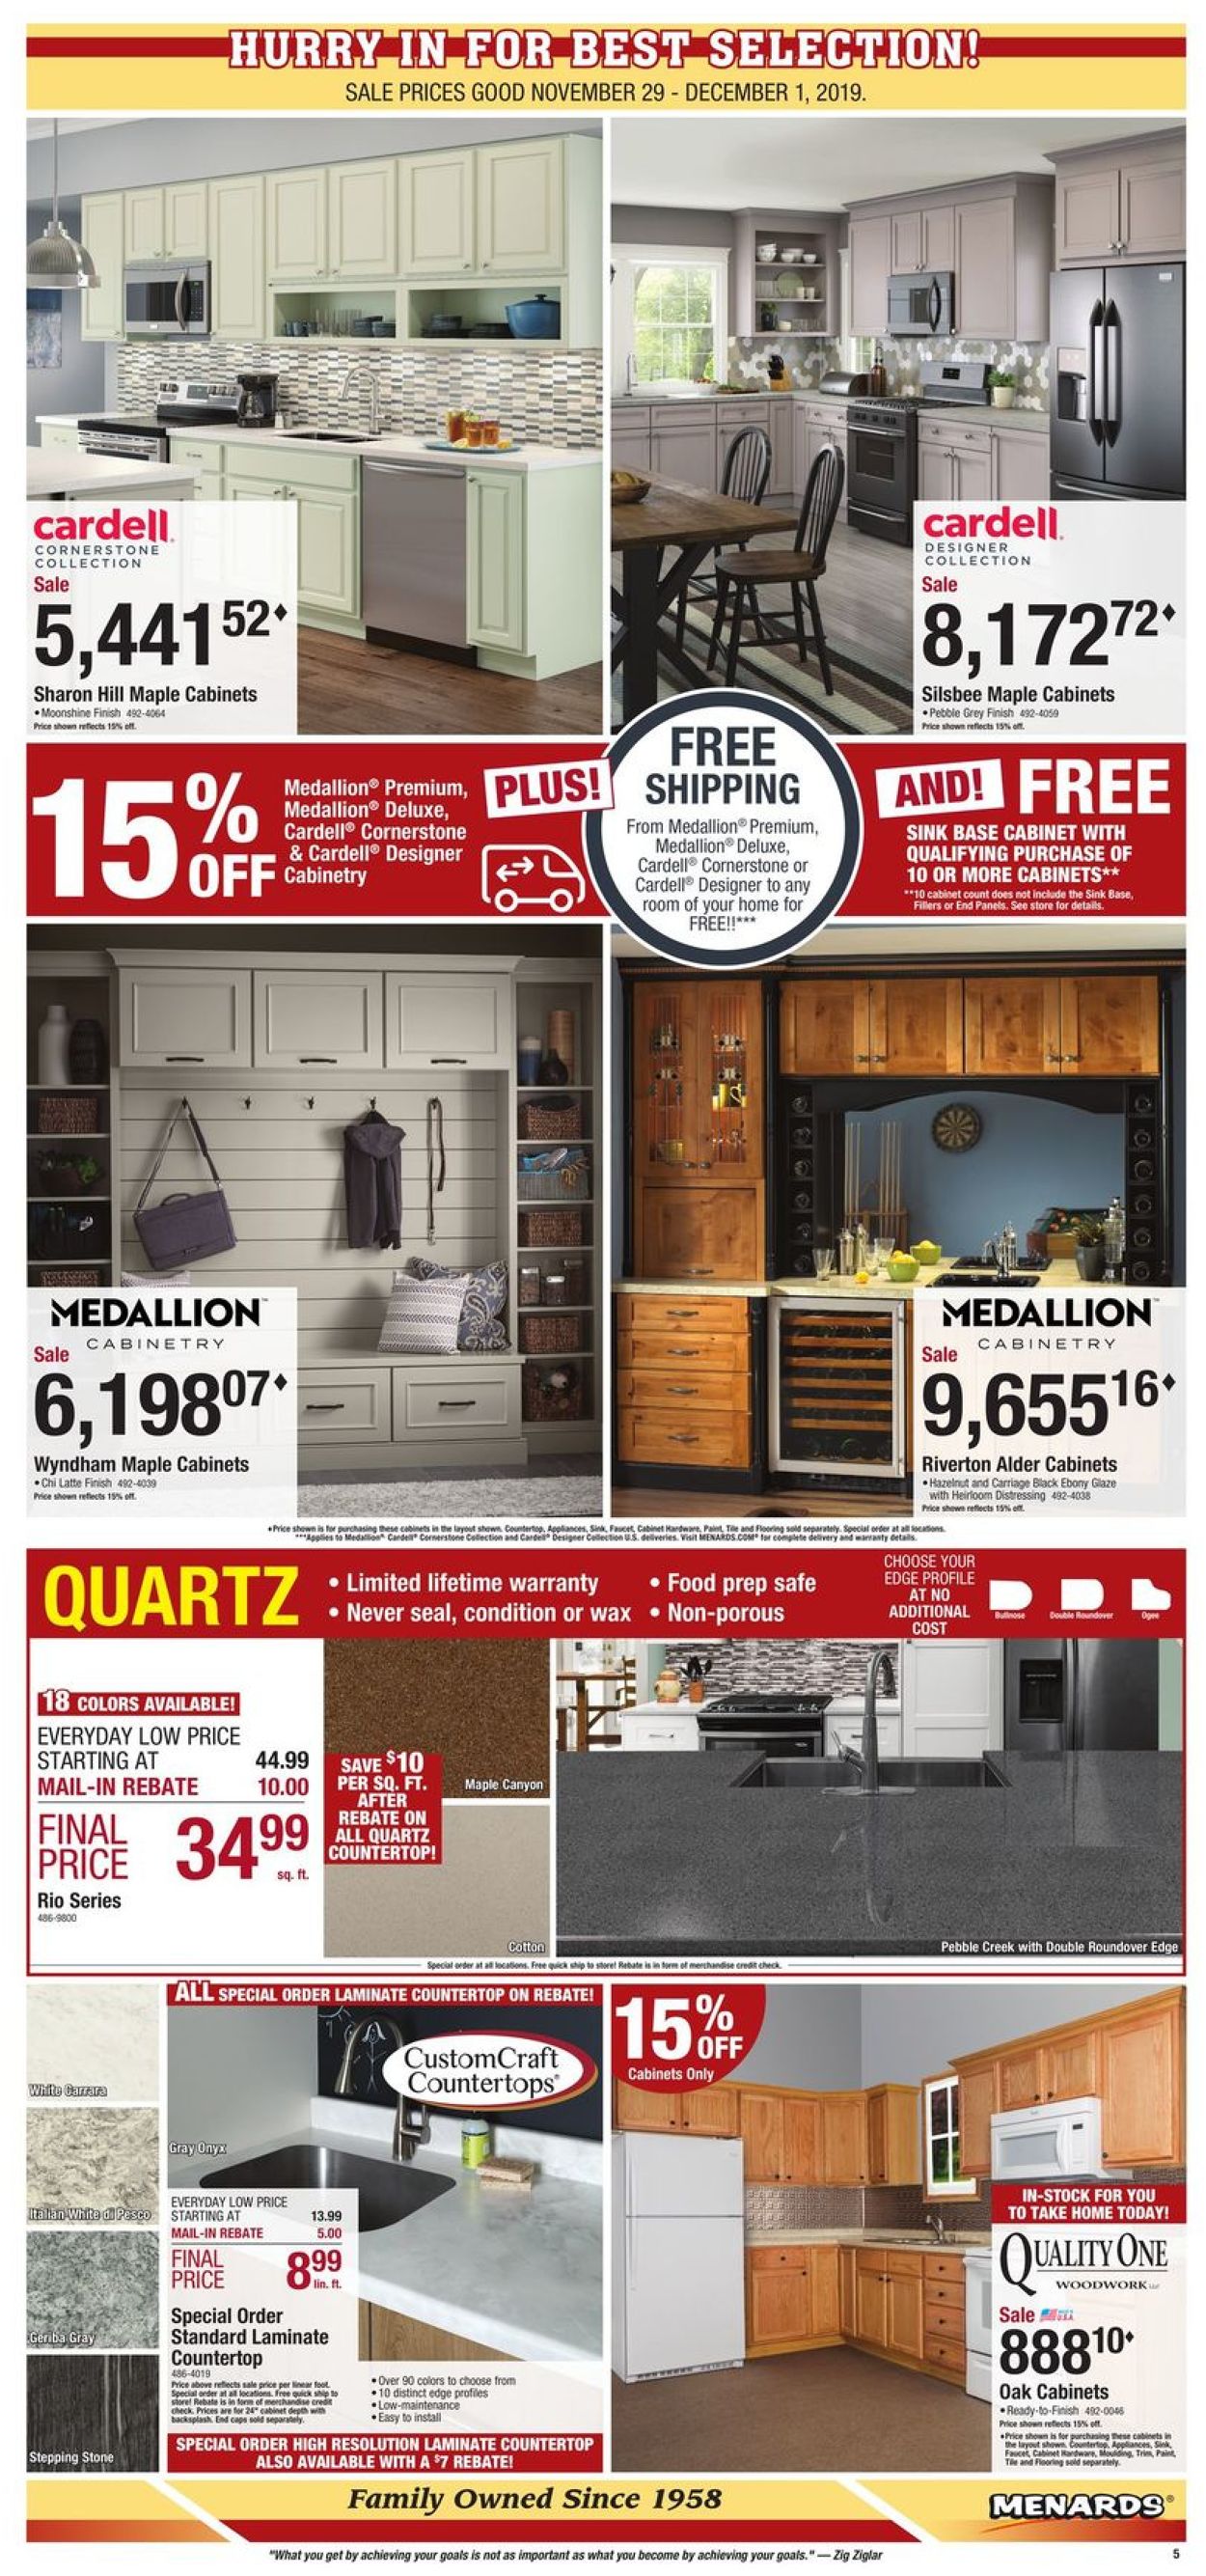 Menards - Black Friday Sale 2019 Current weekly ad 11/29 - 12/01/2019 [5] - 0